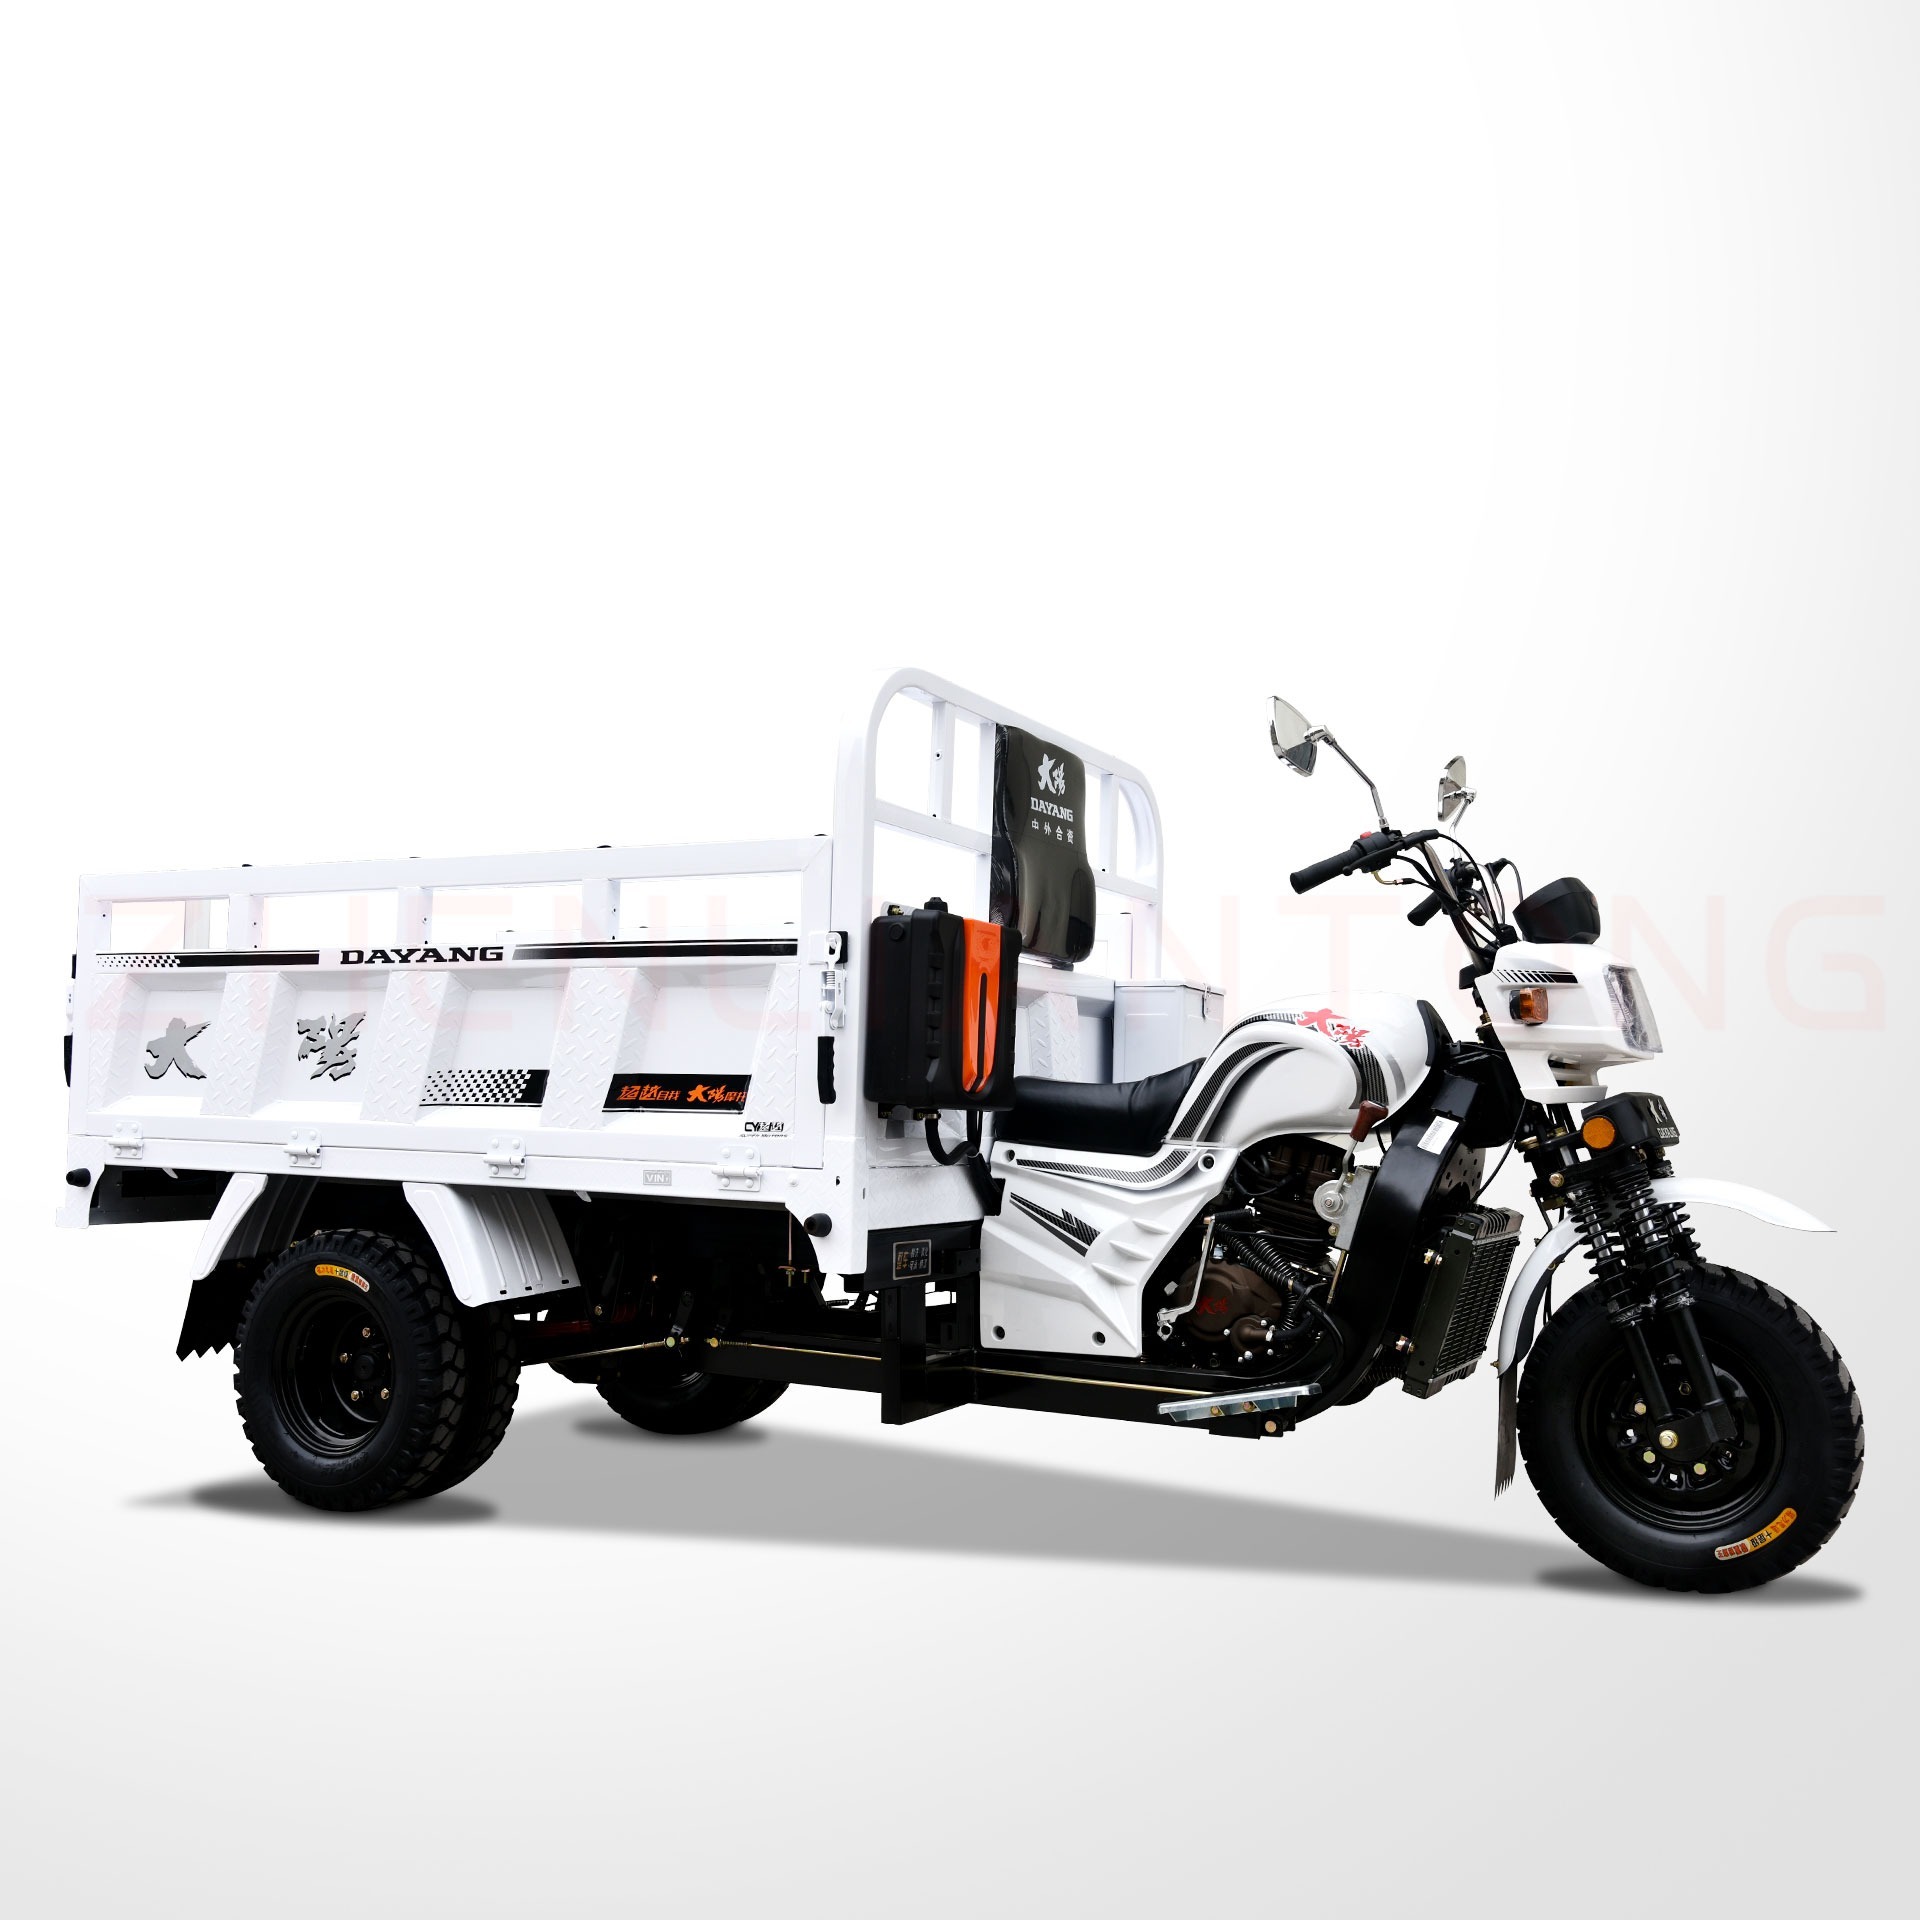 DAYANG Brand hot selling 200cc Cargo Motorized Tricycle With powerful Engine cargo bike Packing Pcs 3 wheels motorcycle